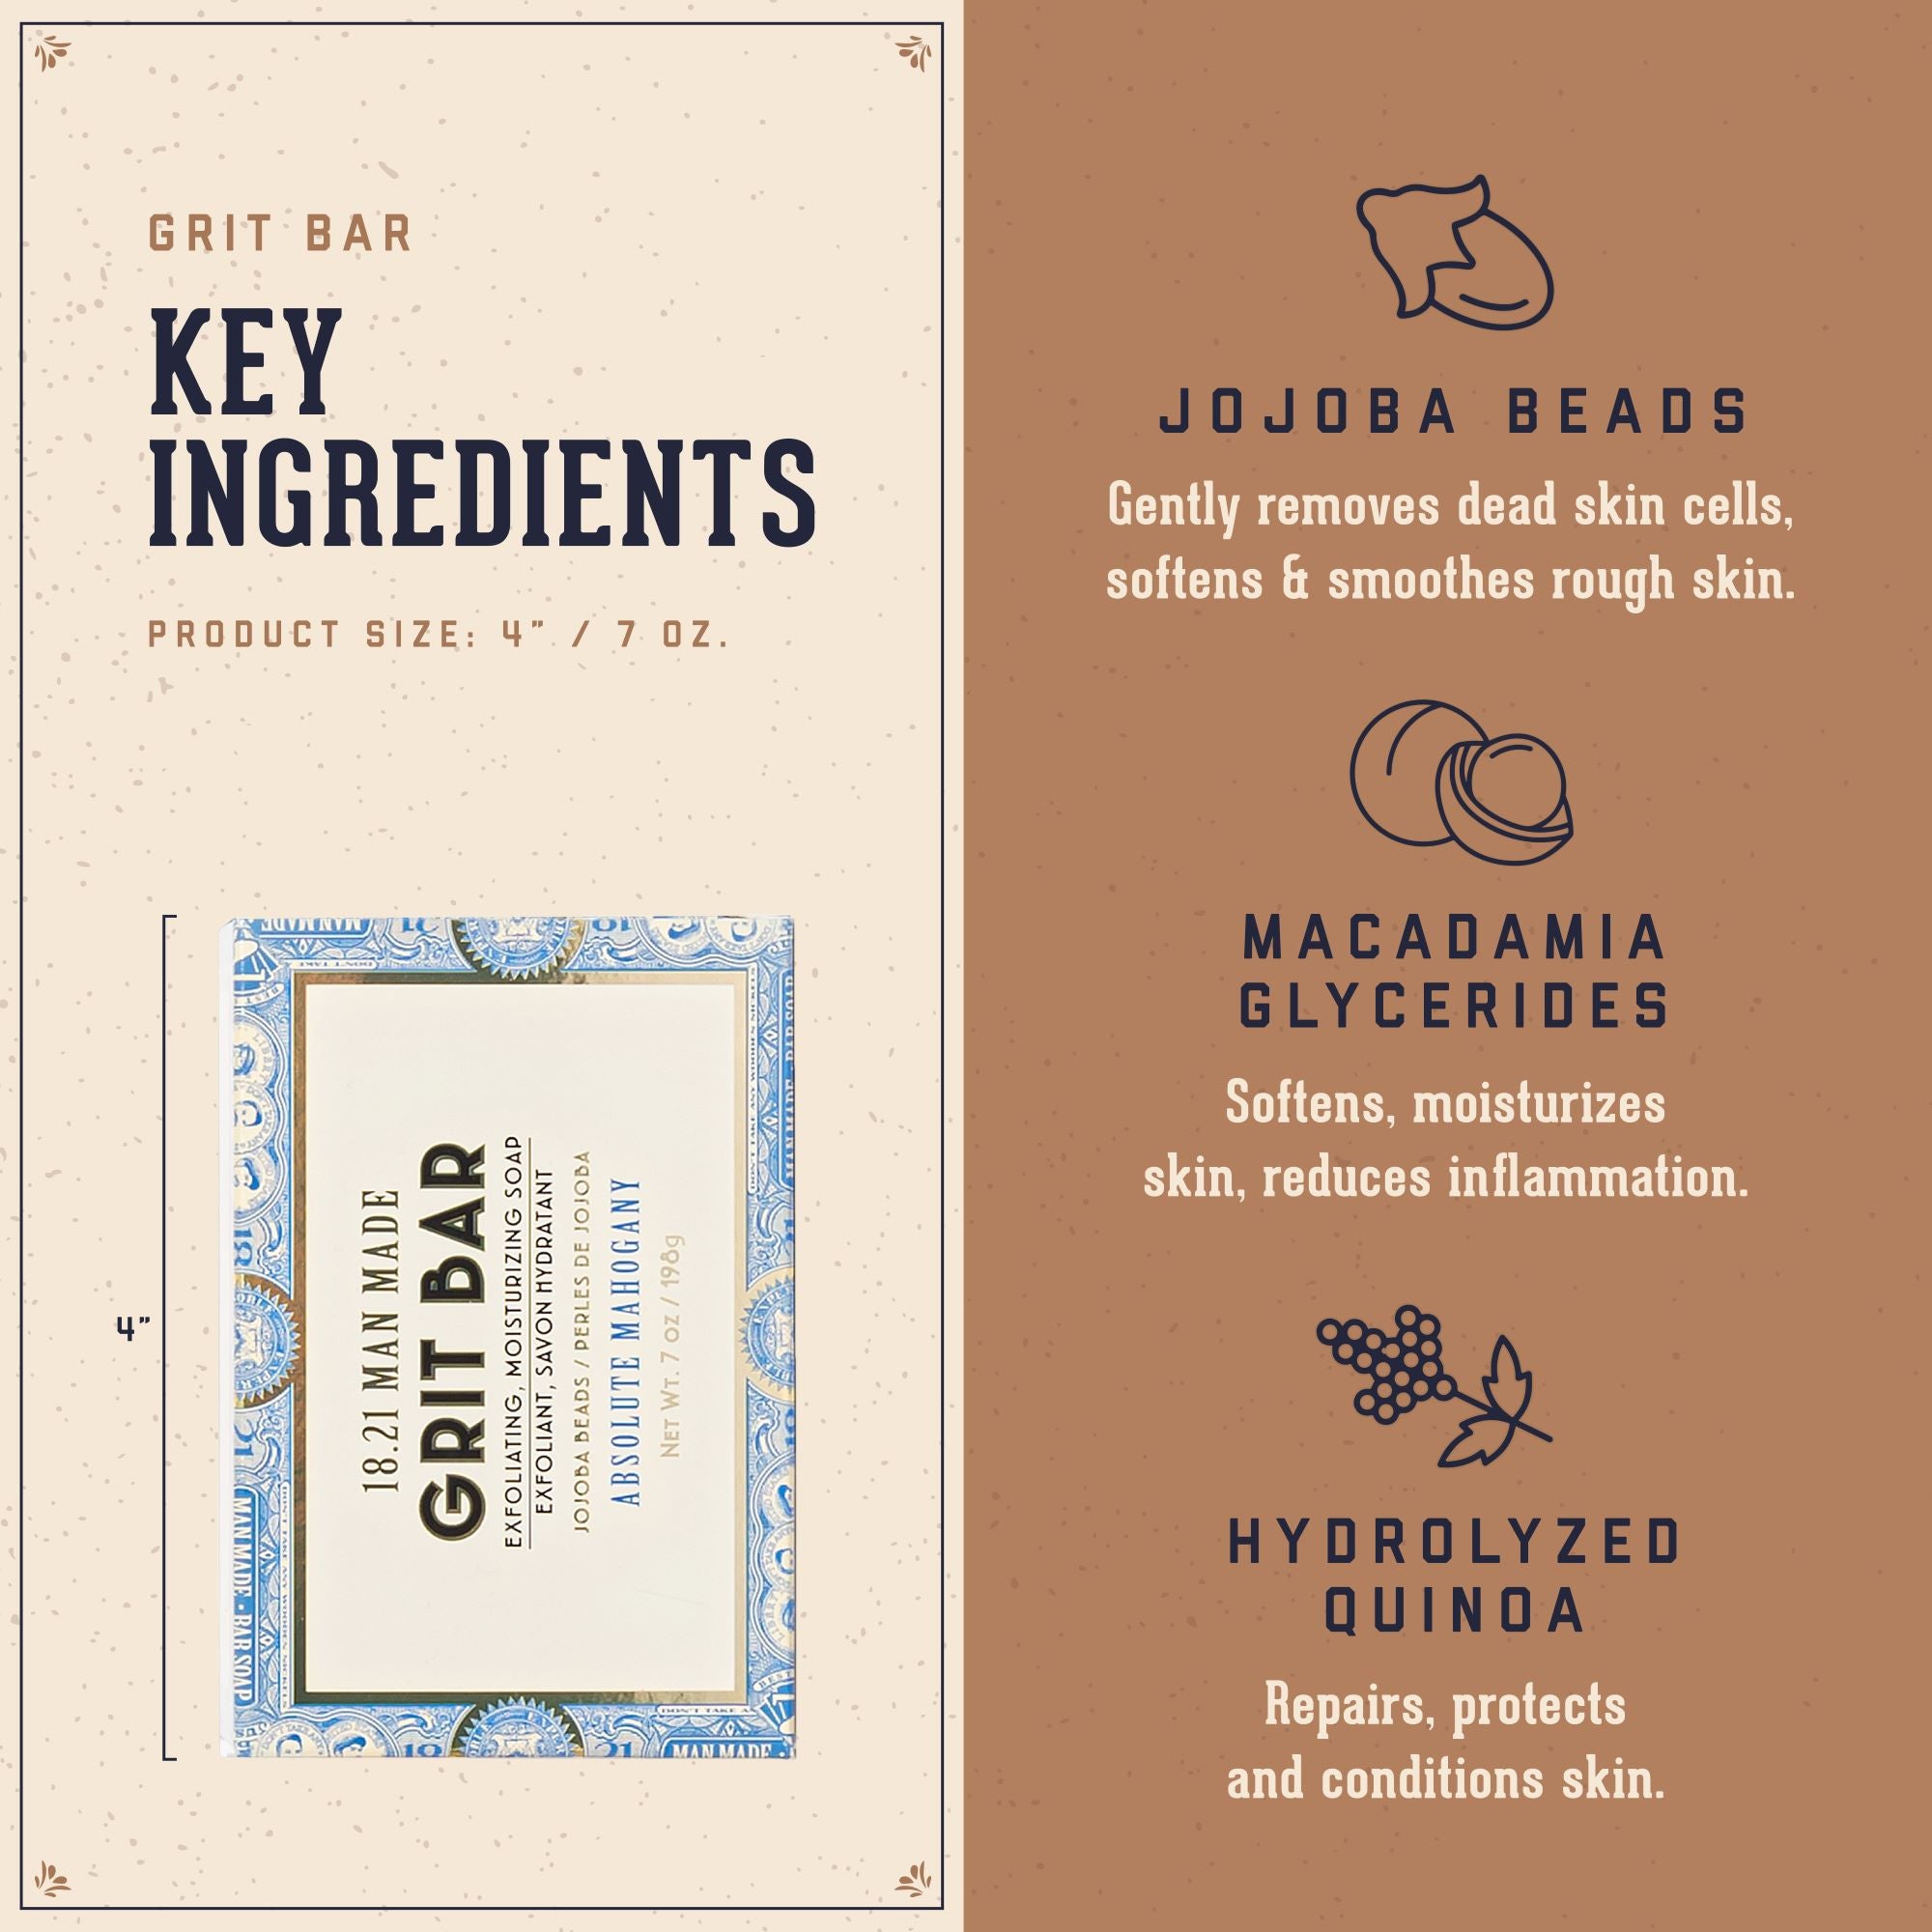 Grit Bar Key Ingredients.  Jojoba Beads: gently removes dead skin cells, softens and smoothes rough skin.  Macademia Glycerides: softens, moisturizes skin, reduces inflammation.  Hydrolzyed Quinoa:  repairs, protects, conditions skin.